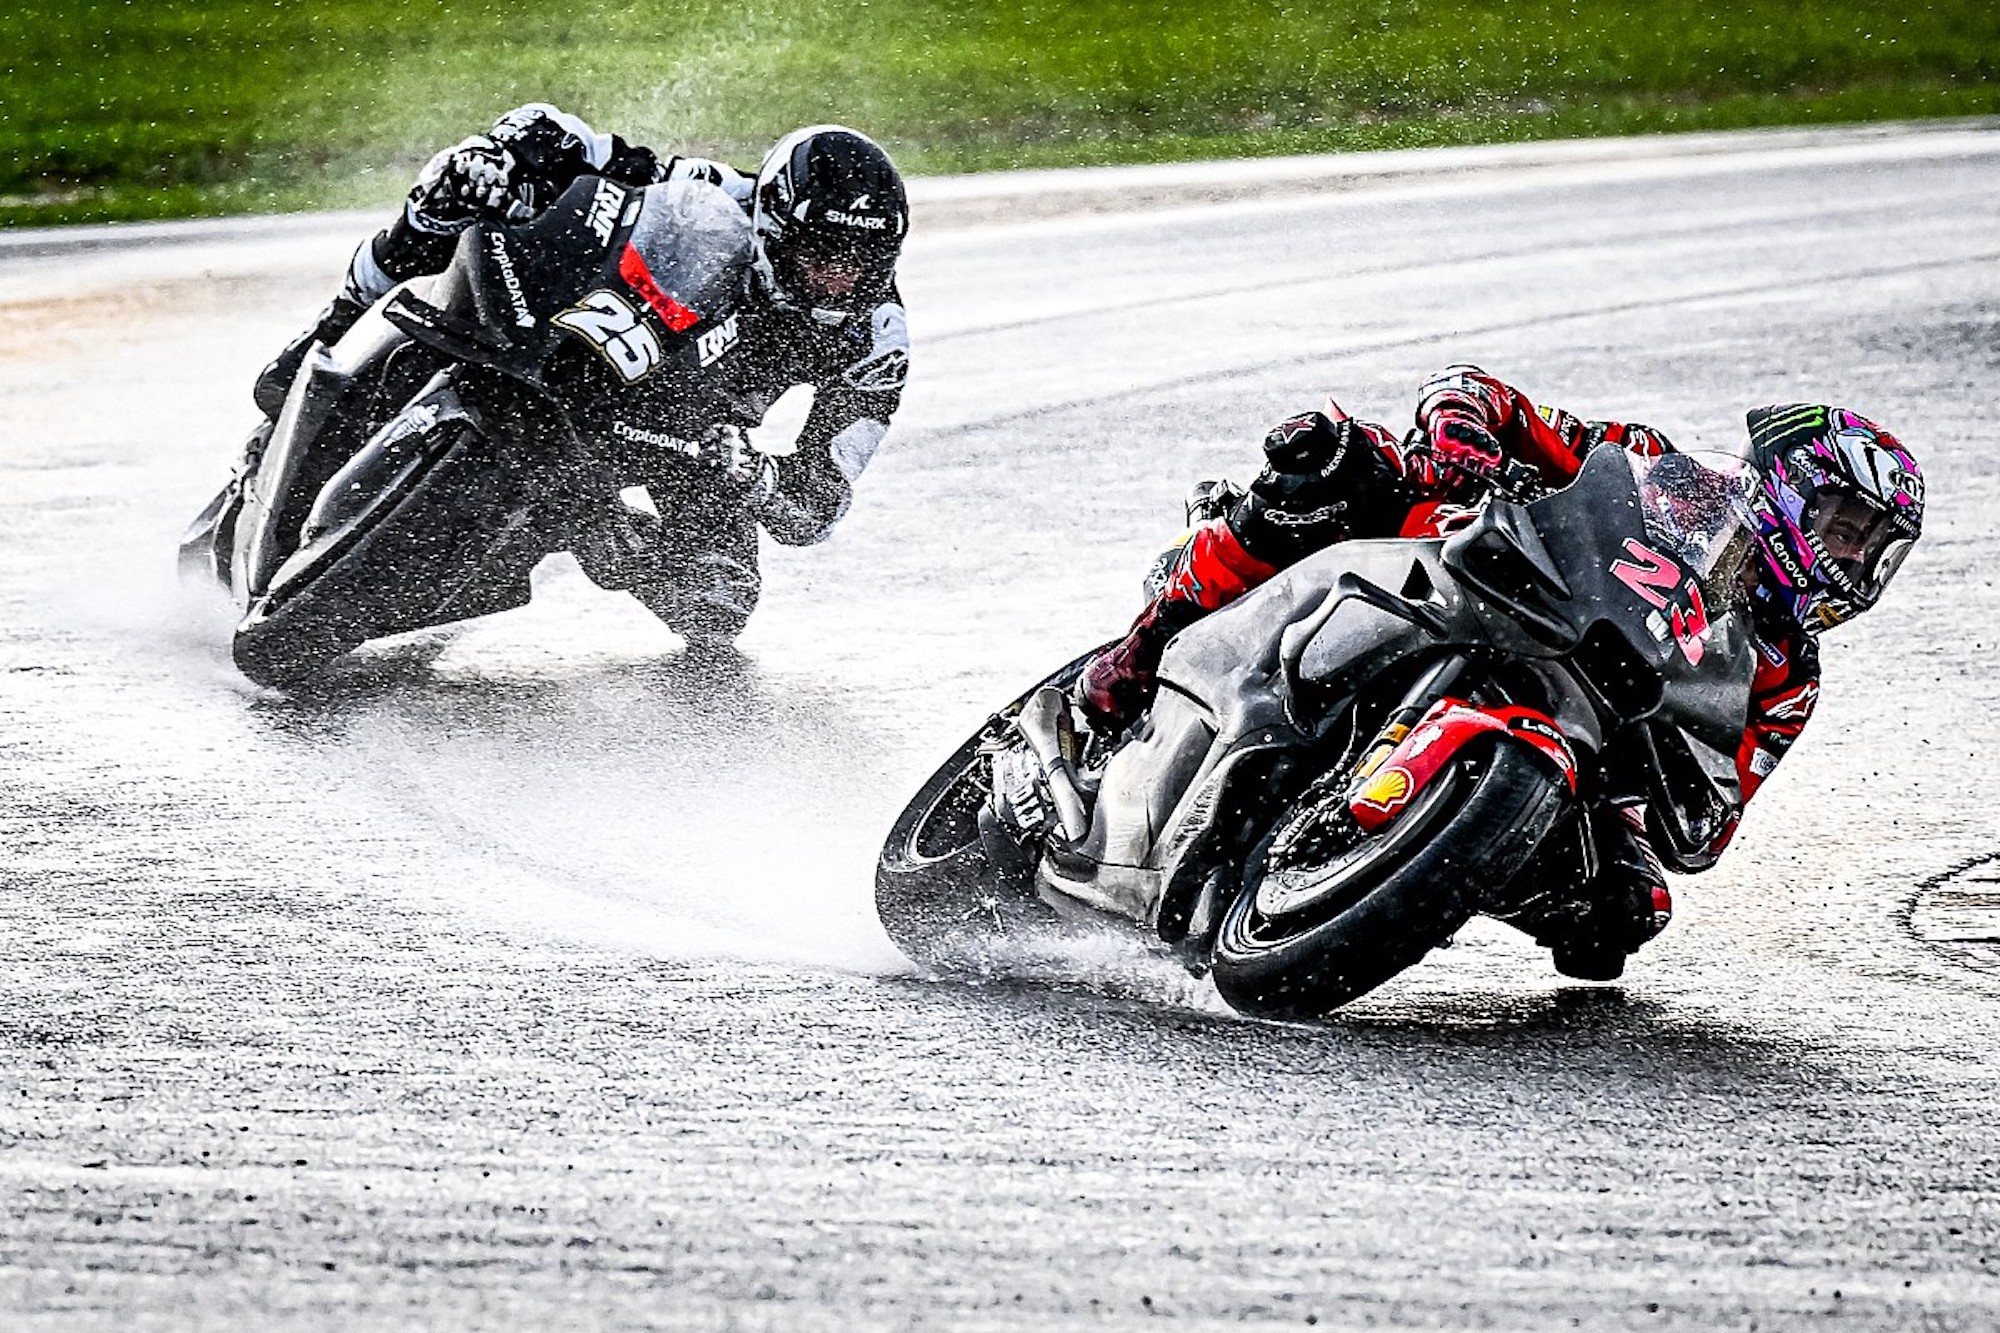 A pair of MotoGP racers showing excellent leaning techniques in rainy weather. Media sourced from Motorsport.